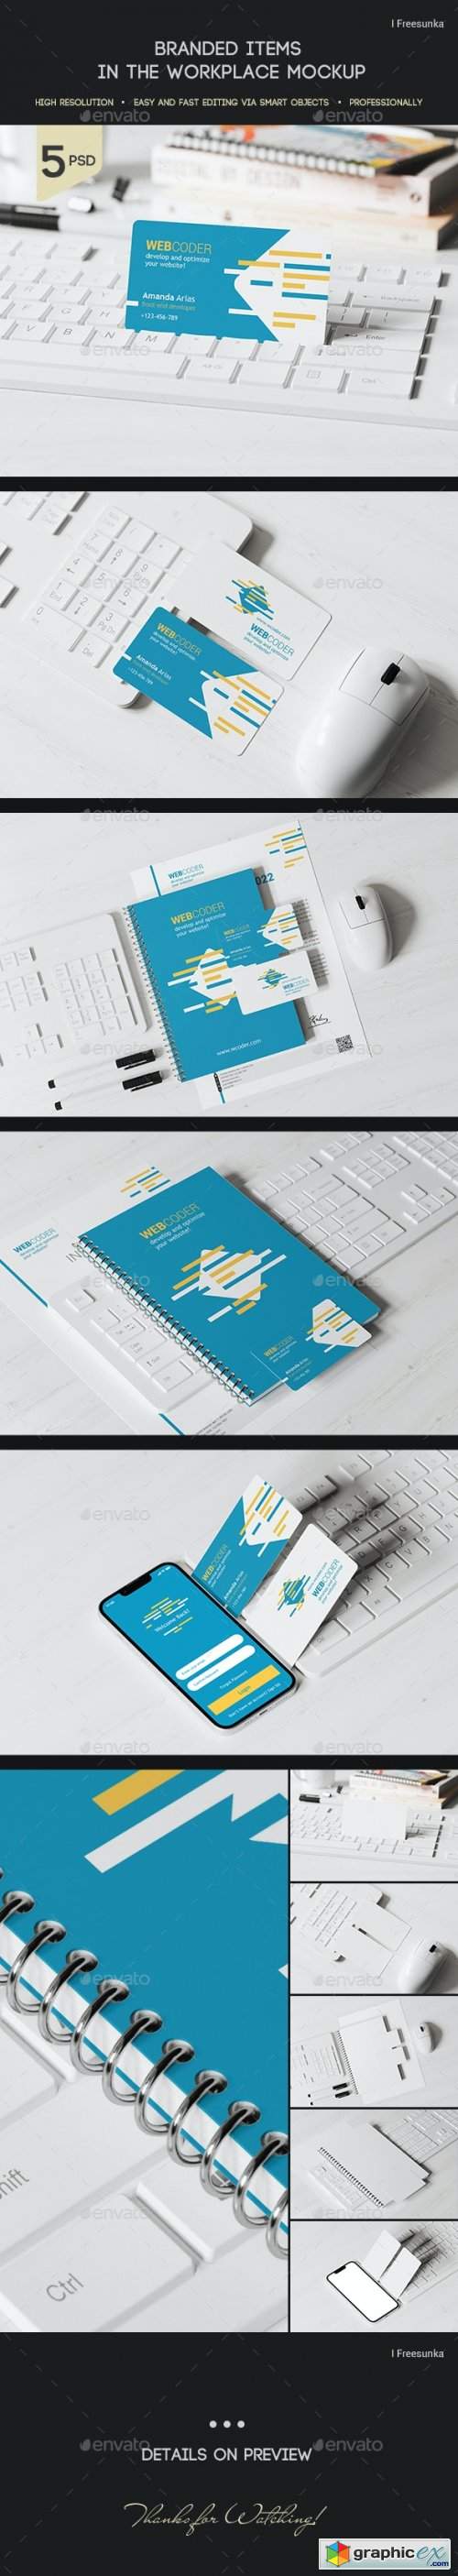 Branded Items In The Workplace Mockup 